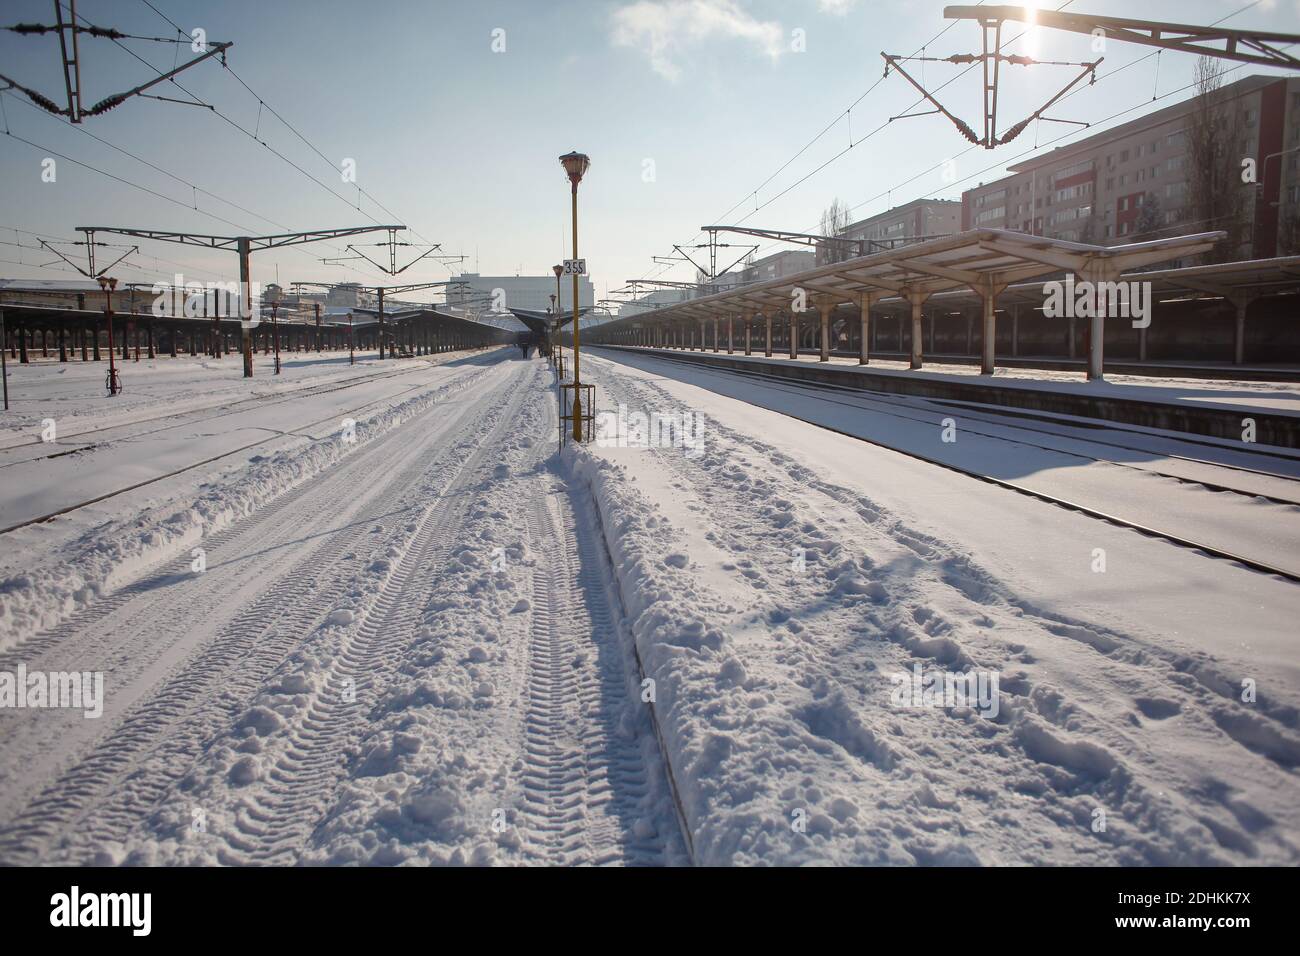 Bucharest, Romania - January 5, 2016: the Northern Railway Station (Gara de Nord) during a cold, sunny and snowy day in Bucharest. Stock Photo